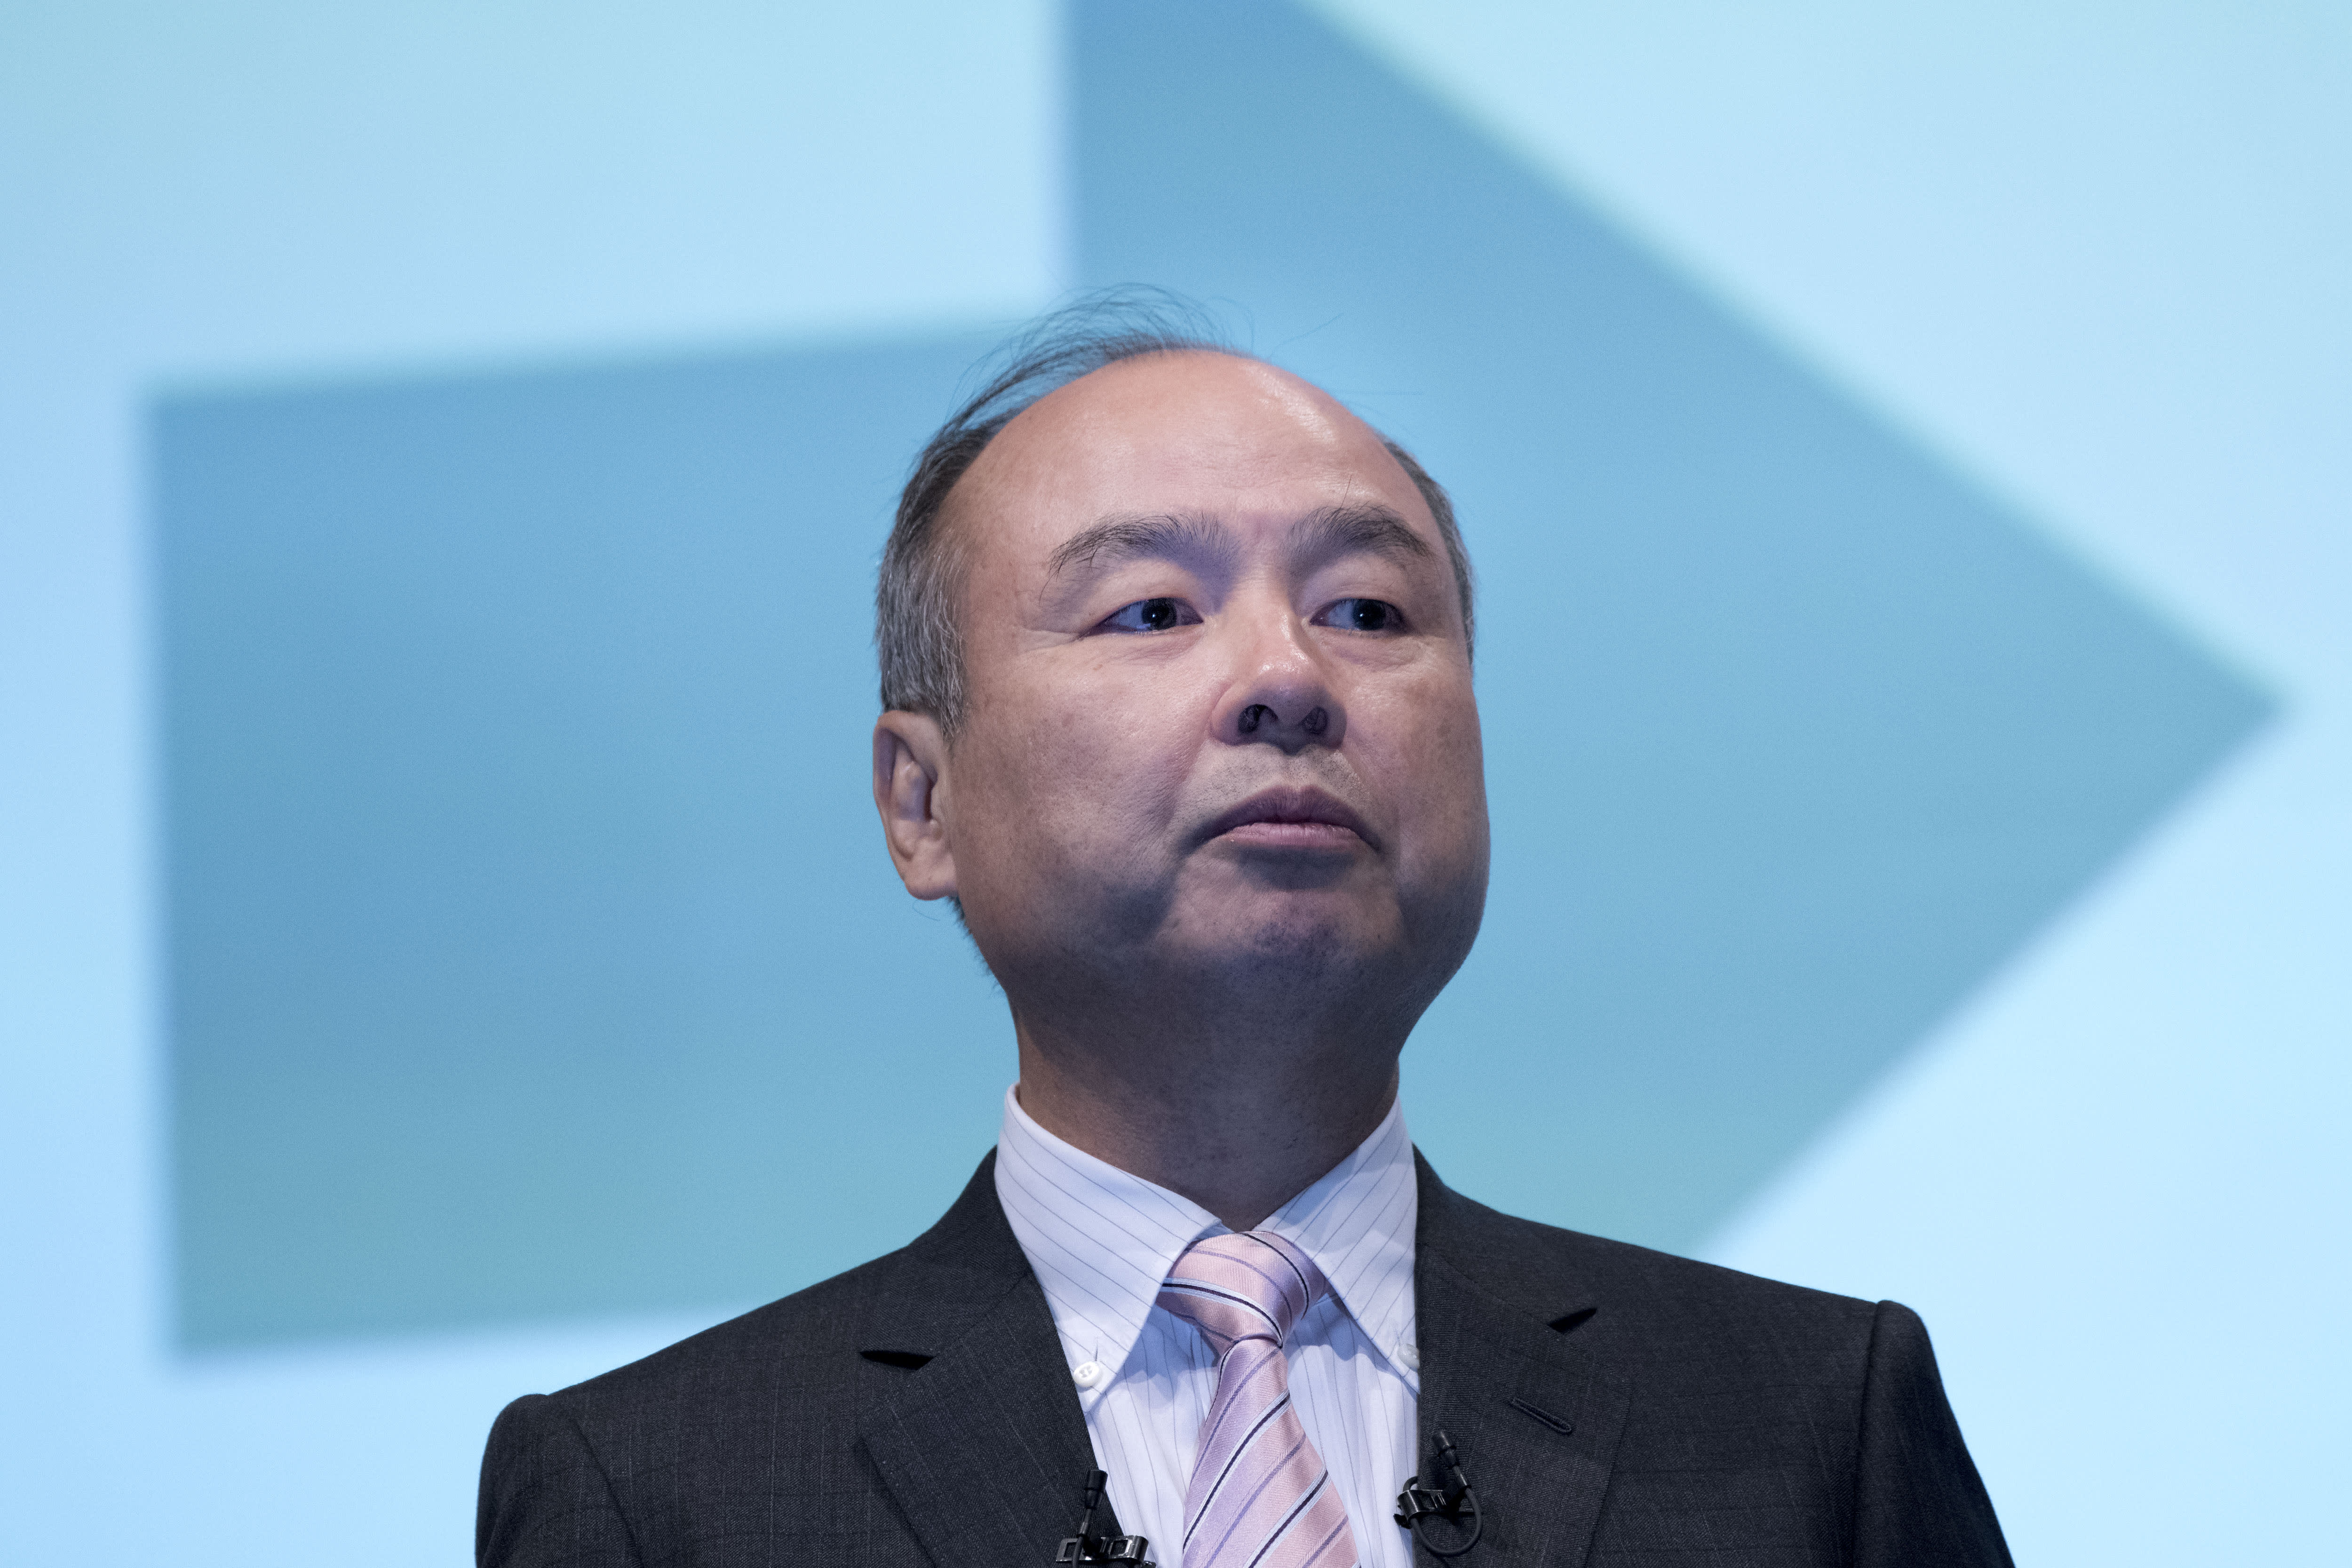 Masayoshi Son claims to have a 300-year vision, but his bets suggest he's making it up as he goes